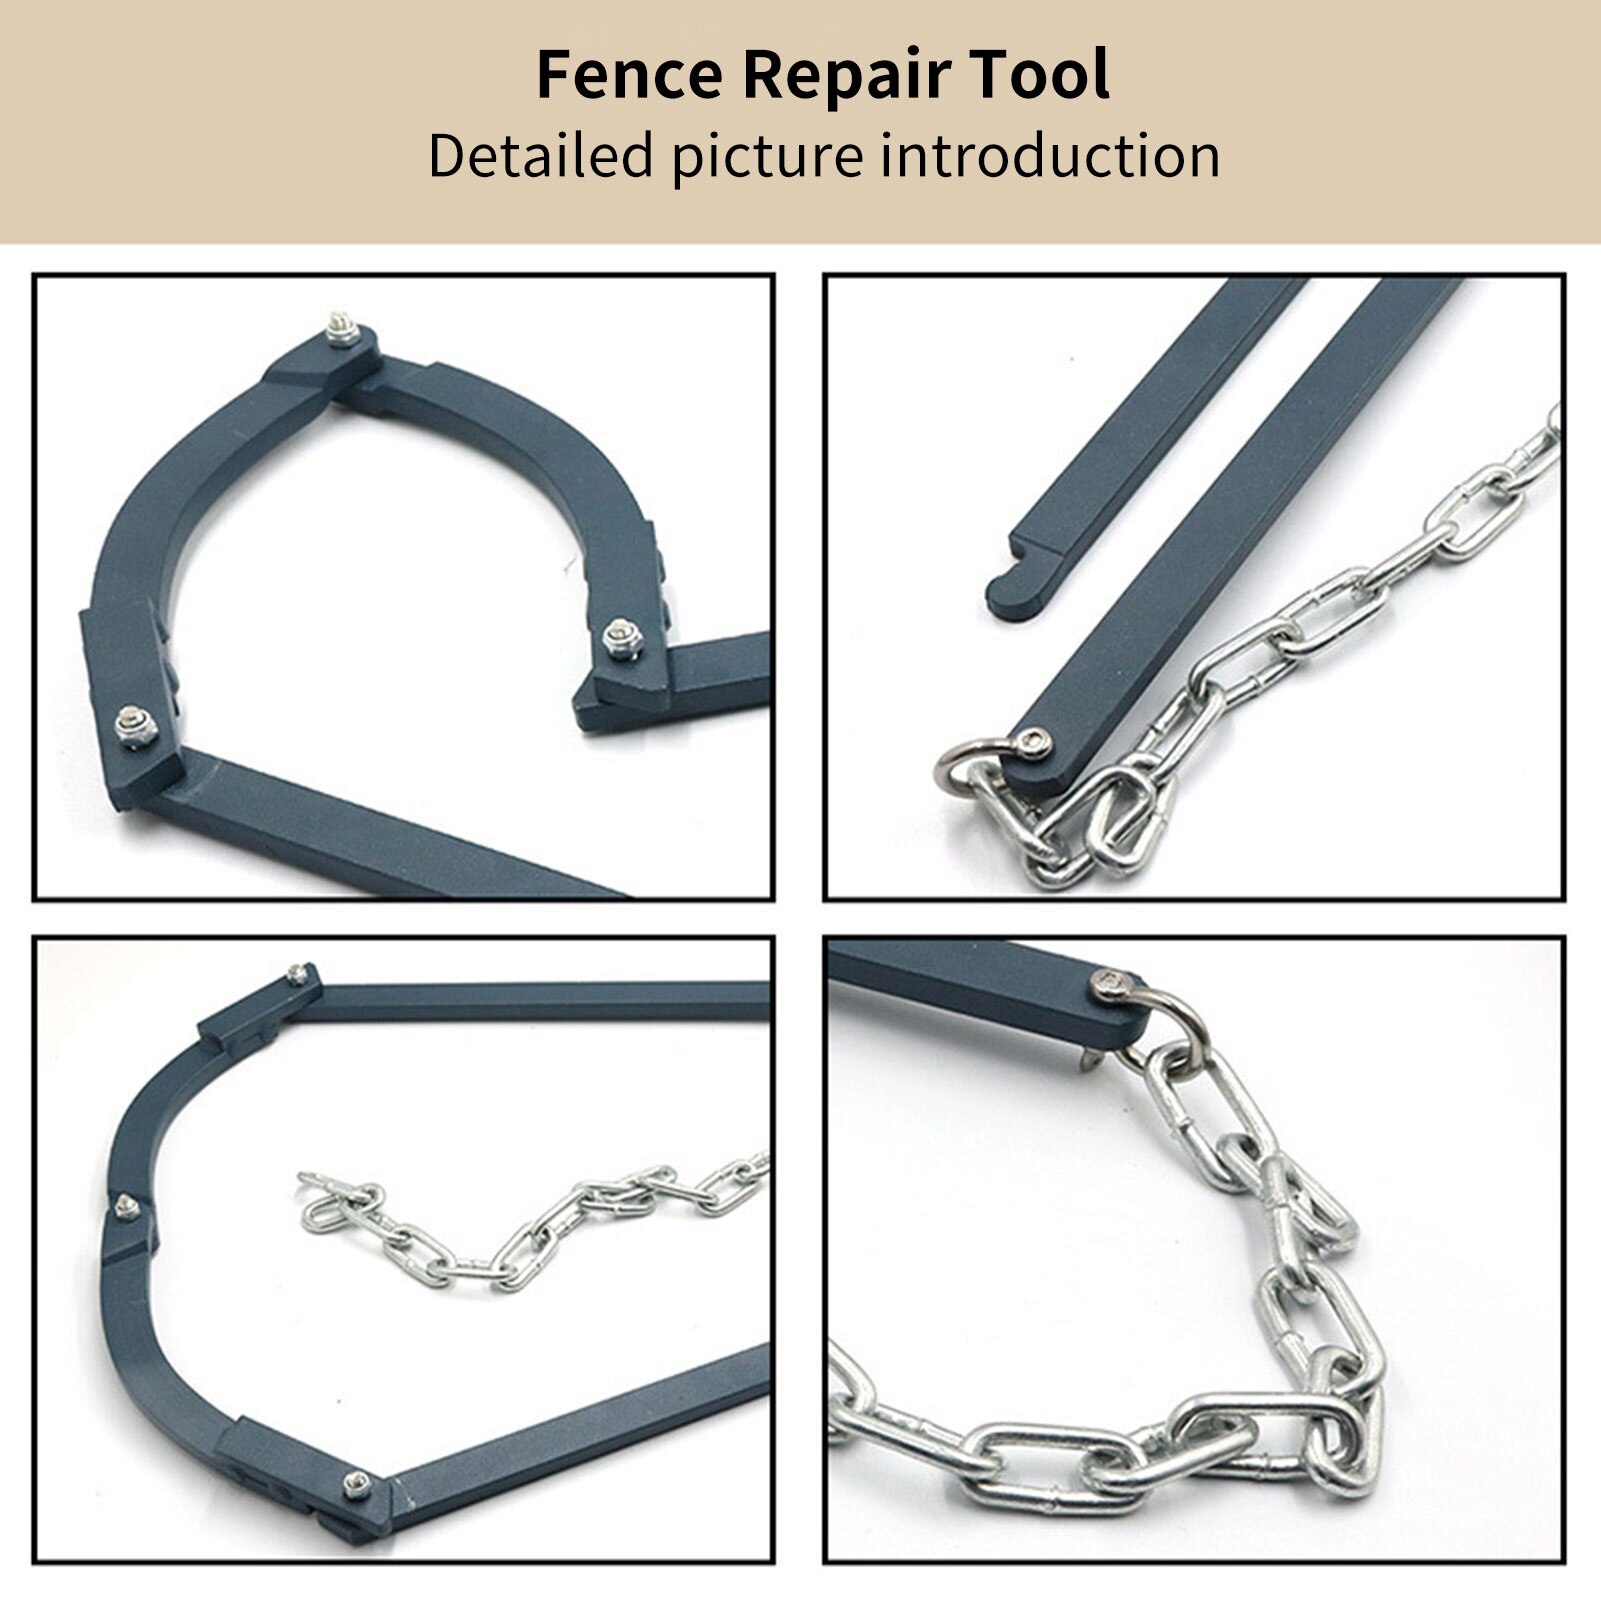 Garden Fence Fixer Chain Wire Barbed Fence Repair Tool Farm Fence Stretcher Horse Fence Tensioner Puller Manual Repair Devi